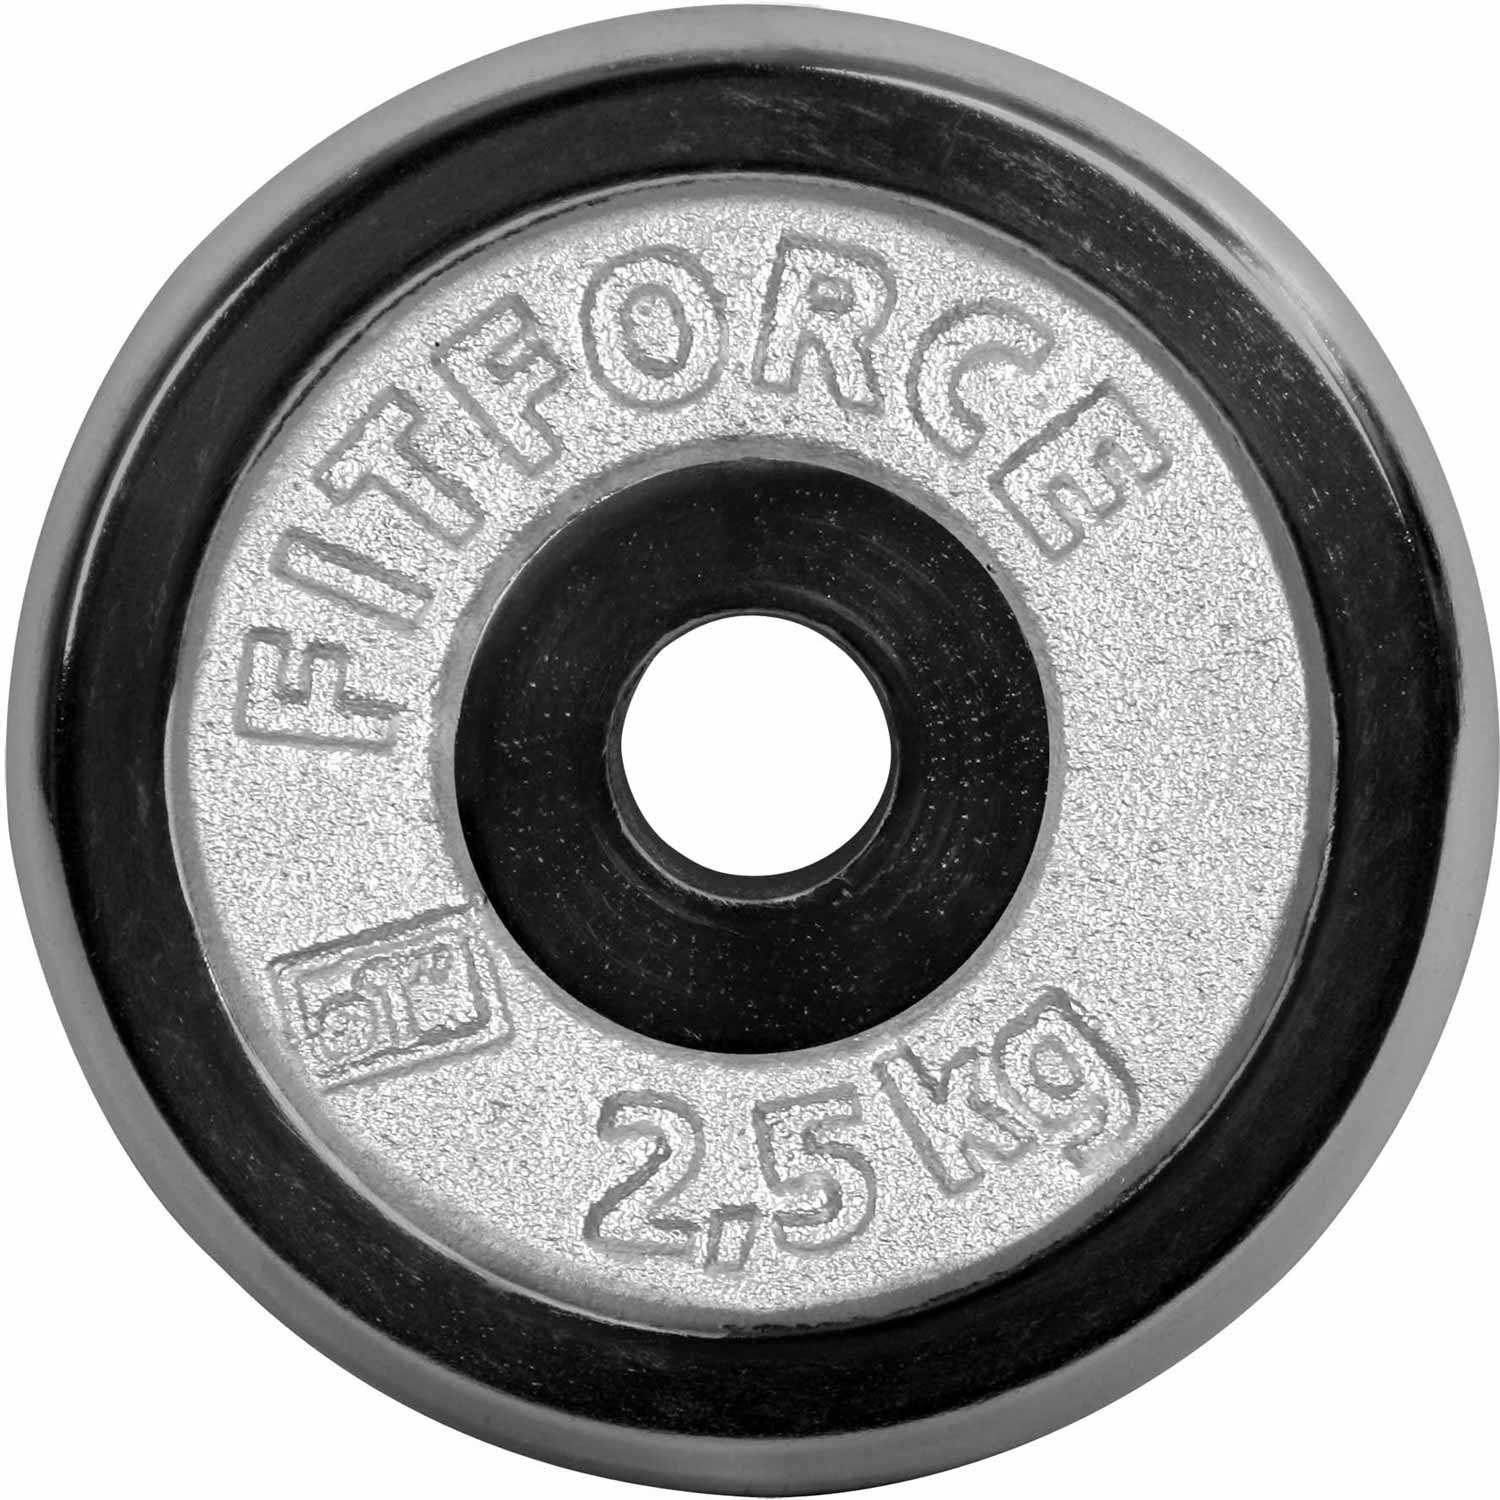 WEIGHT DISC PLATE 2,5KG CHROME - Weight Disc Plate